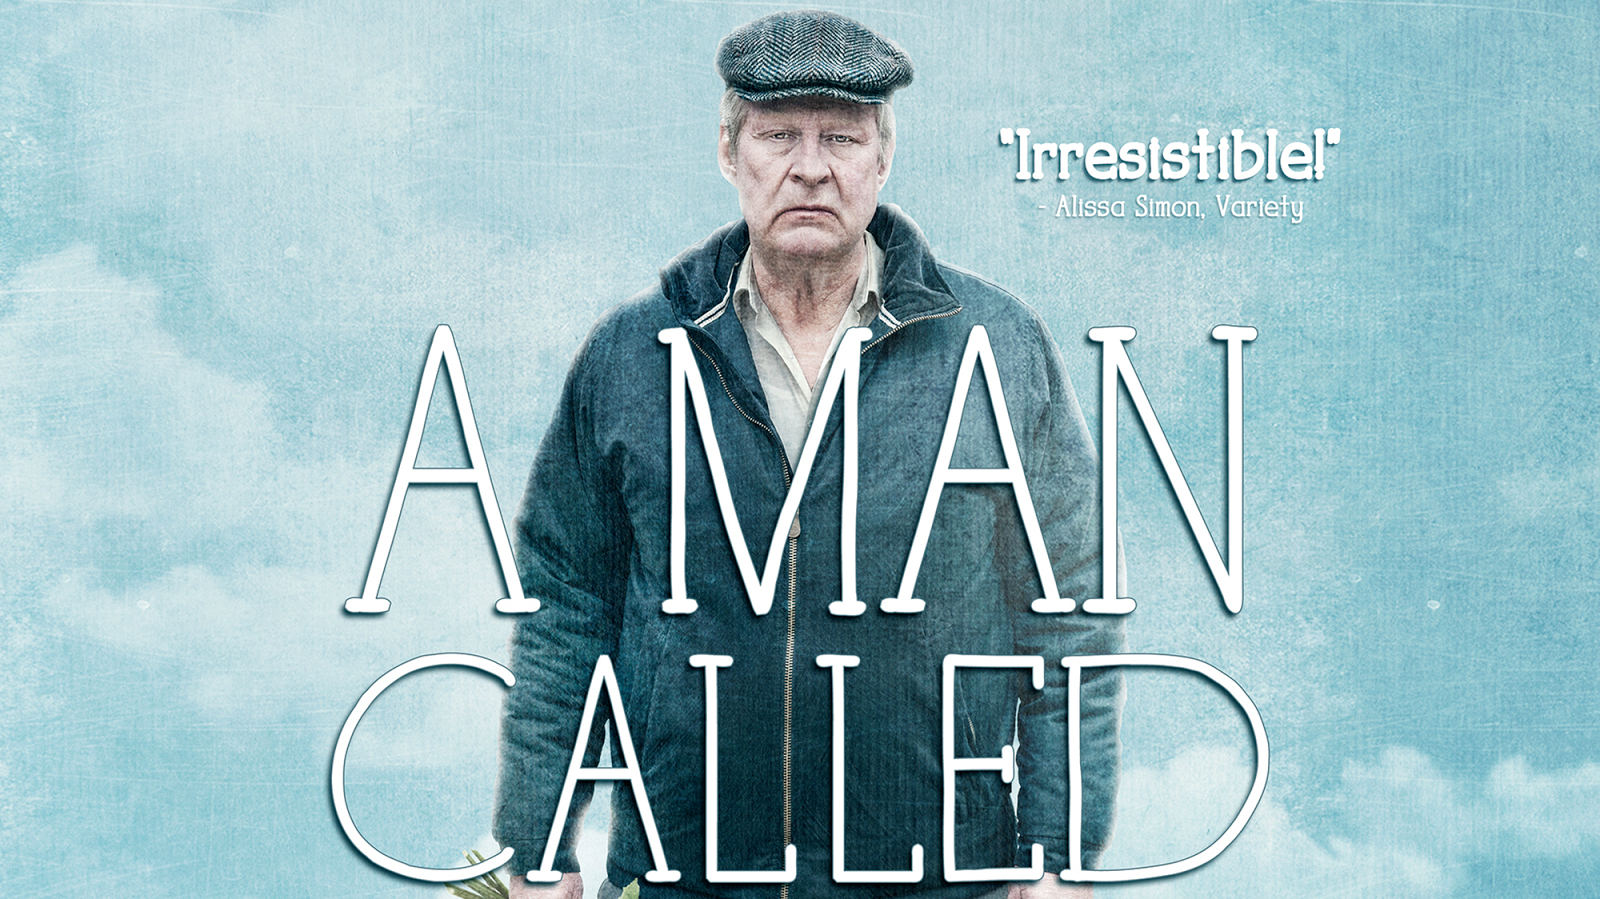 Movie poster for the 2016 Swedish film 'A Man Called Ove'